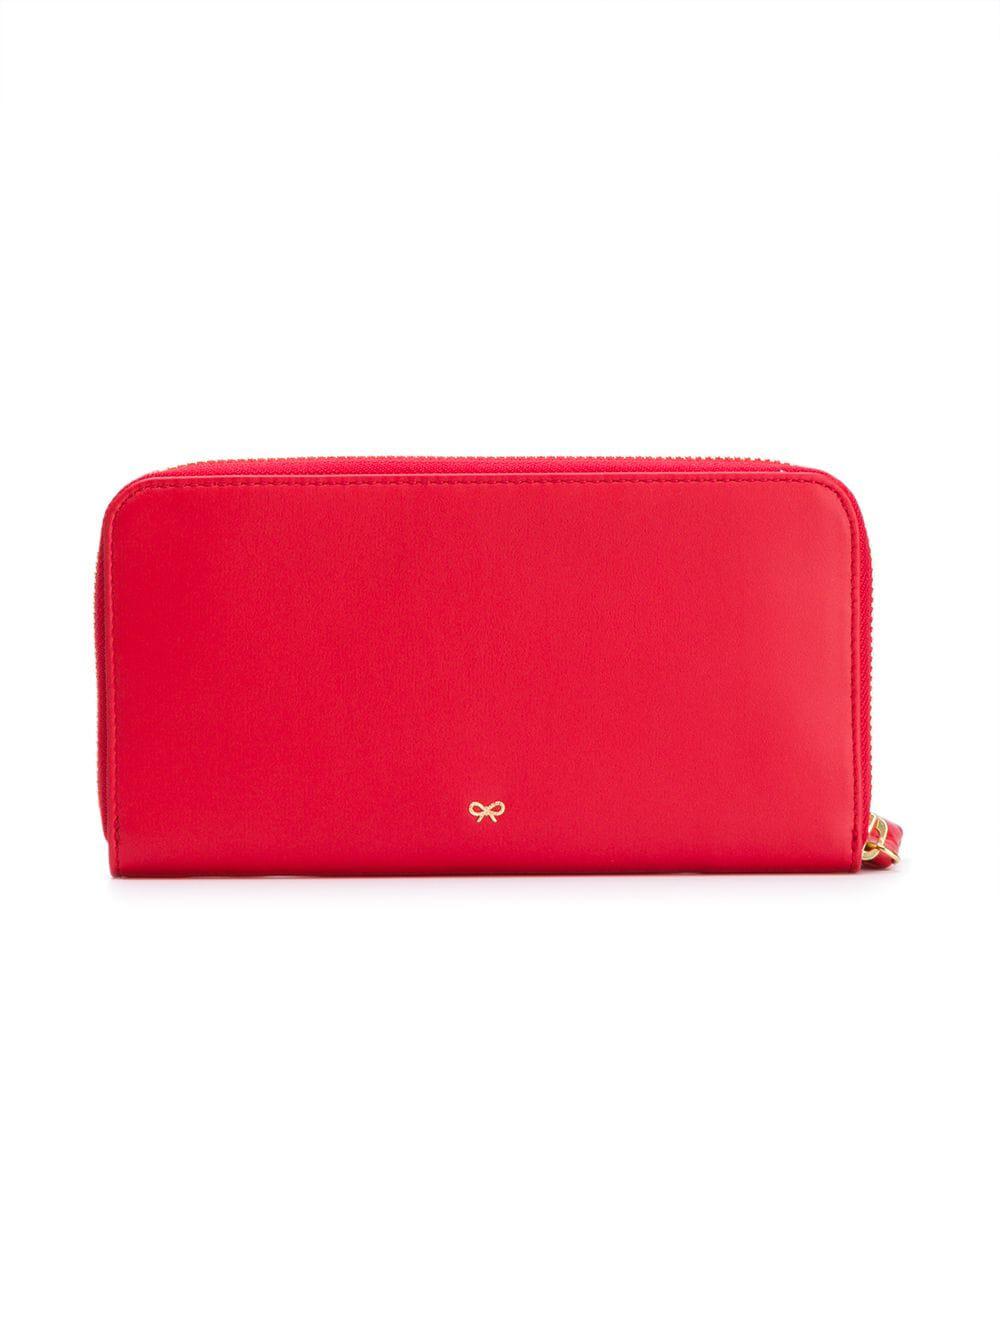 Anya Hindmarch Leather Large Chubby Heart Zip-around Wallet in Red - Lyst